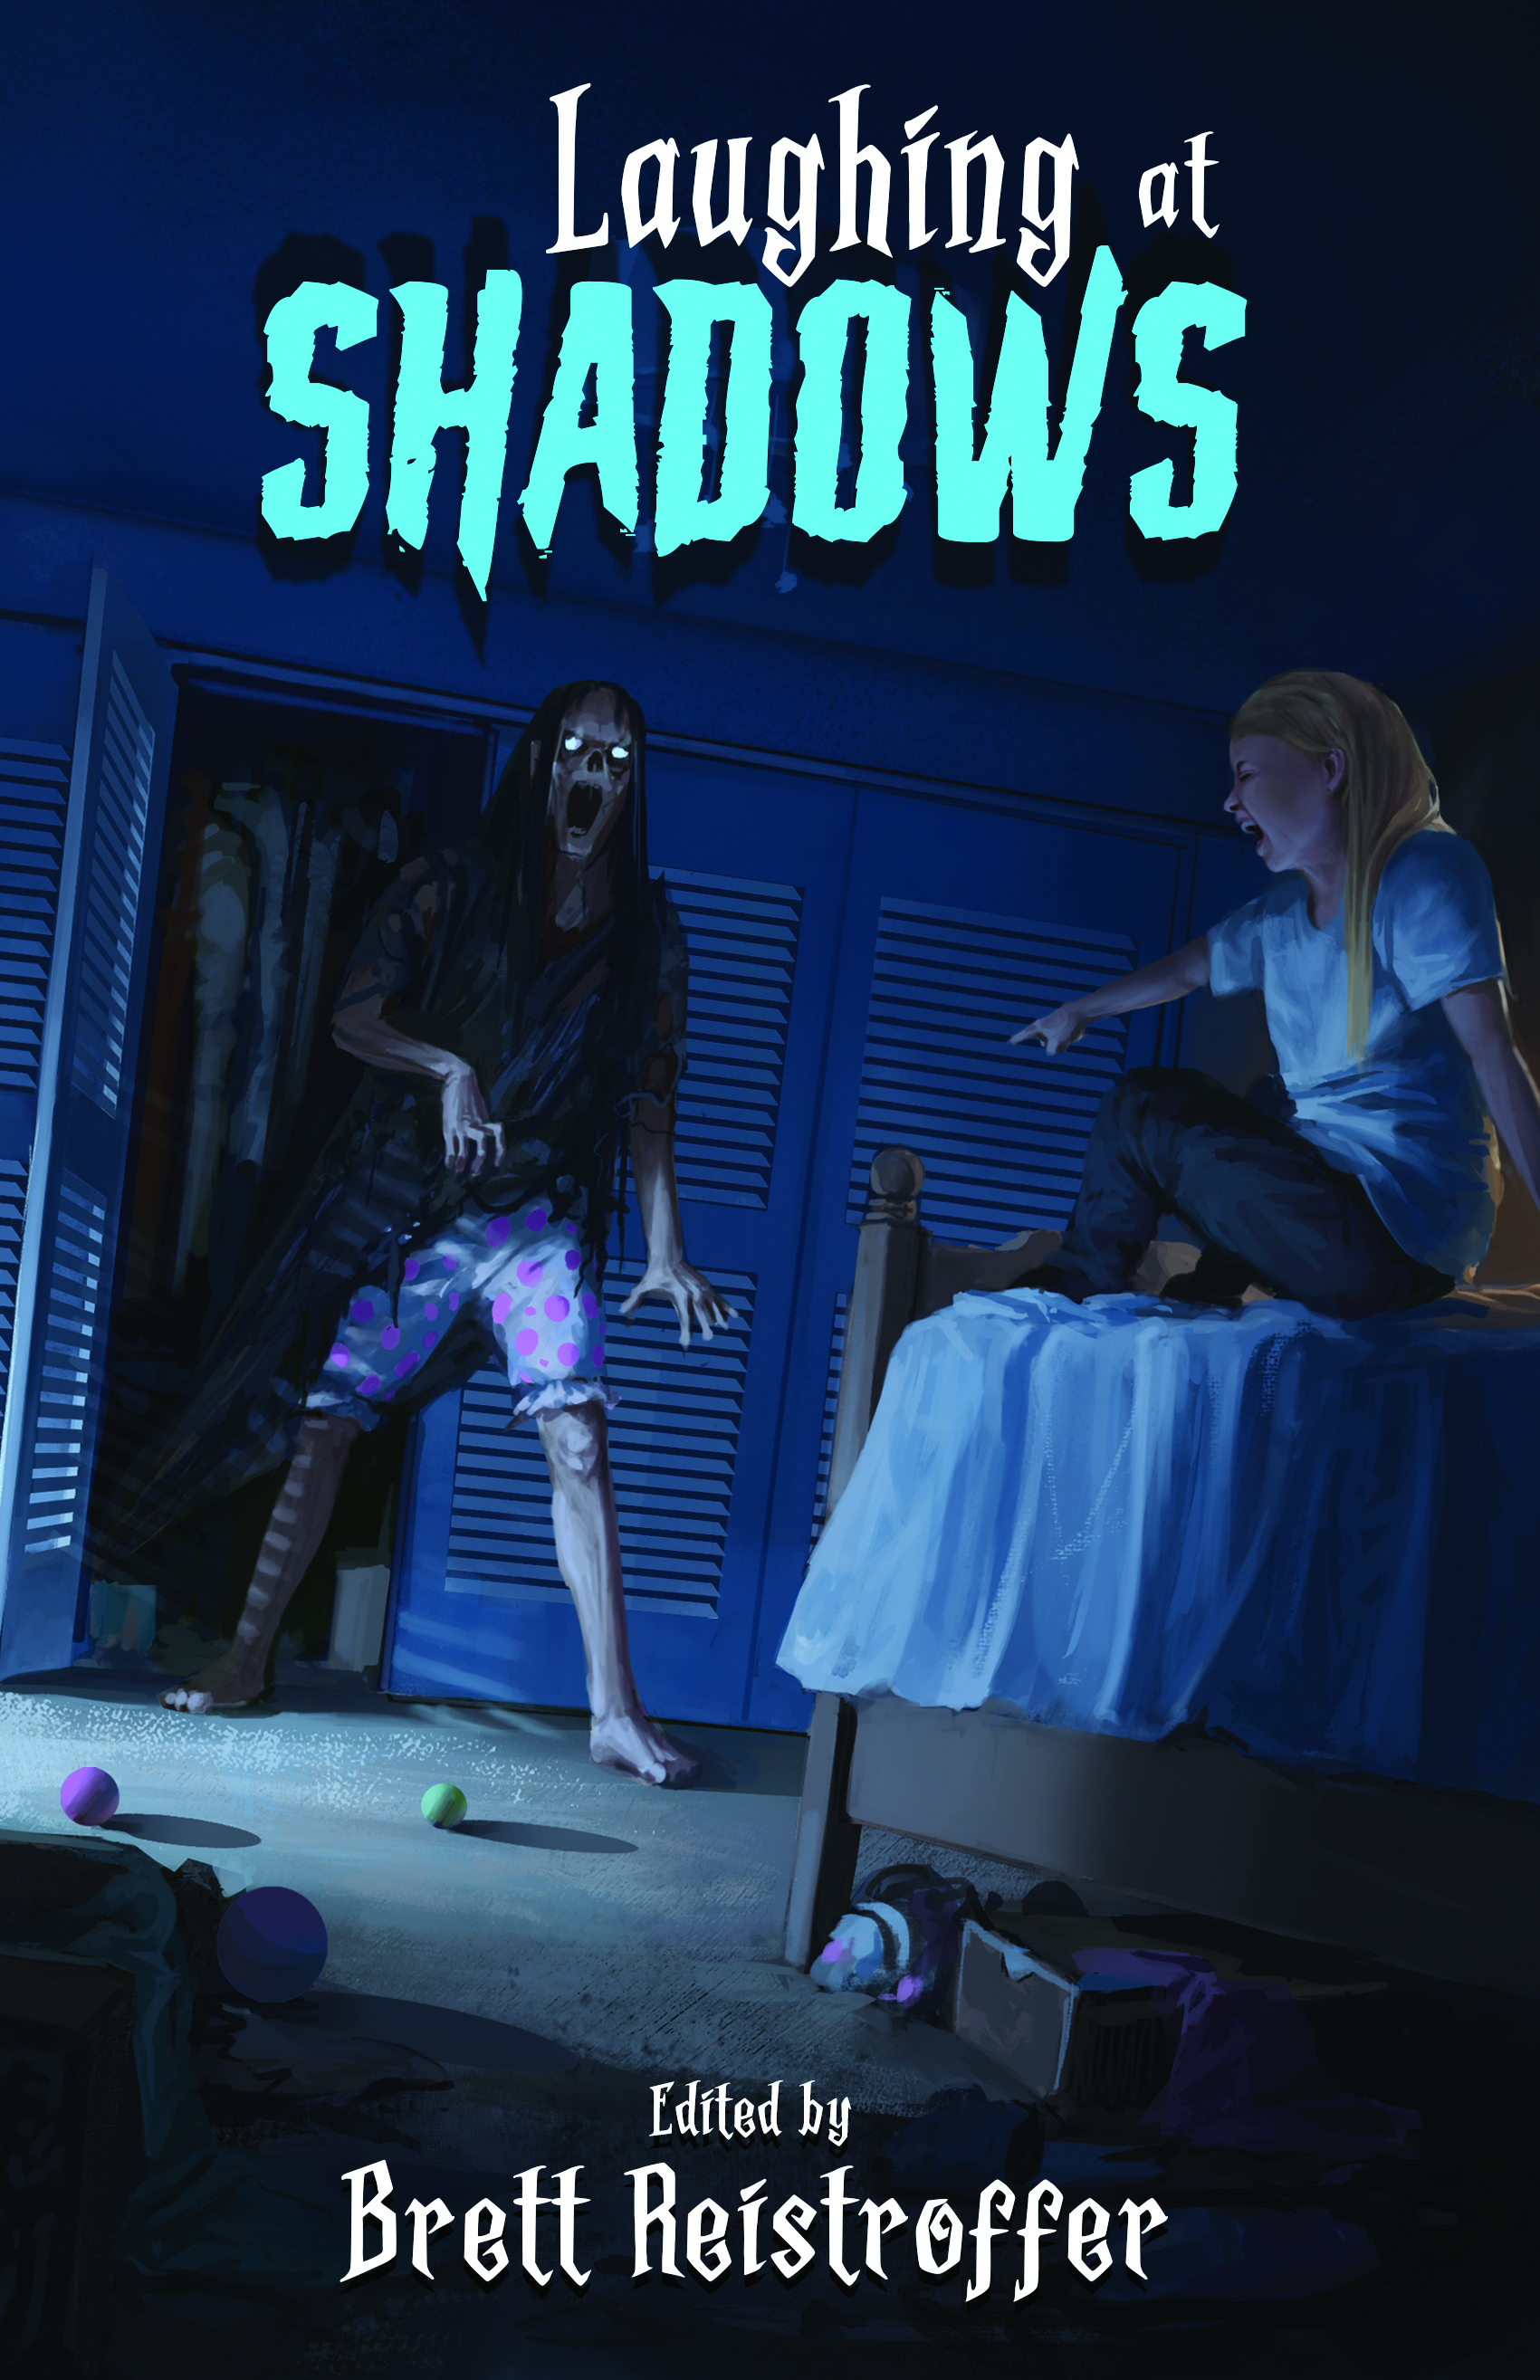 Laughing at Shadows - A Collection of Dark Humor